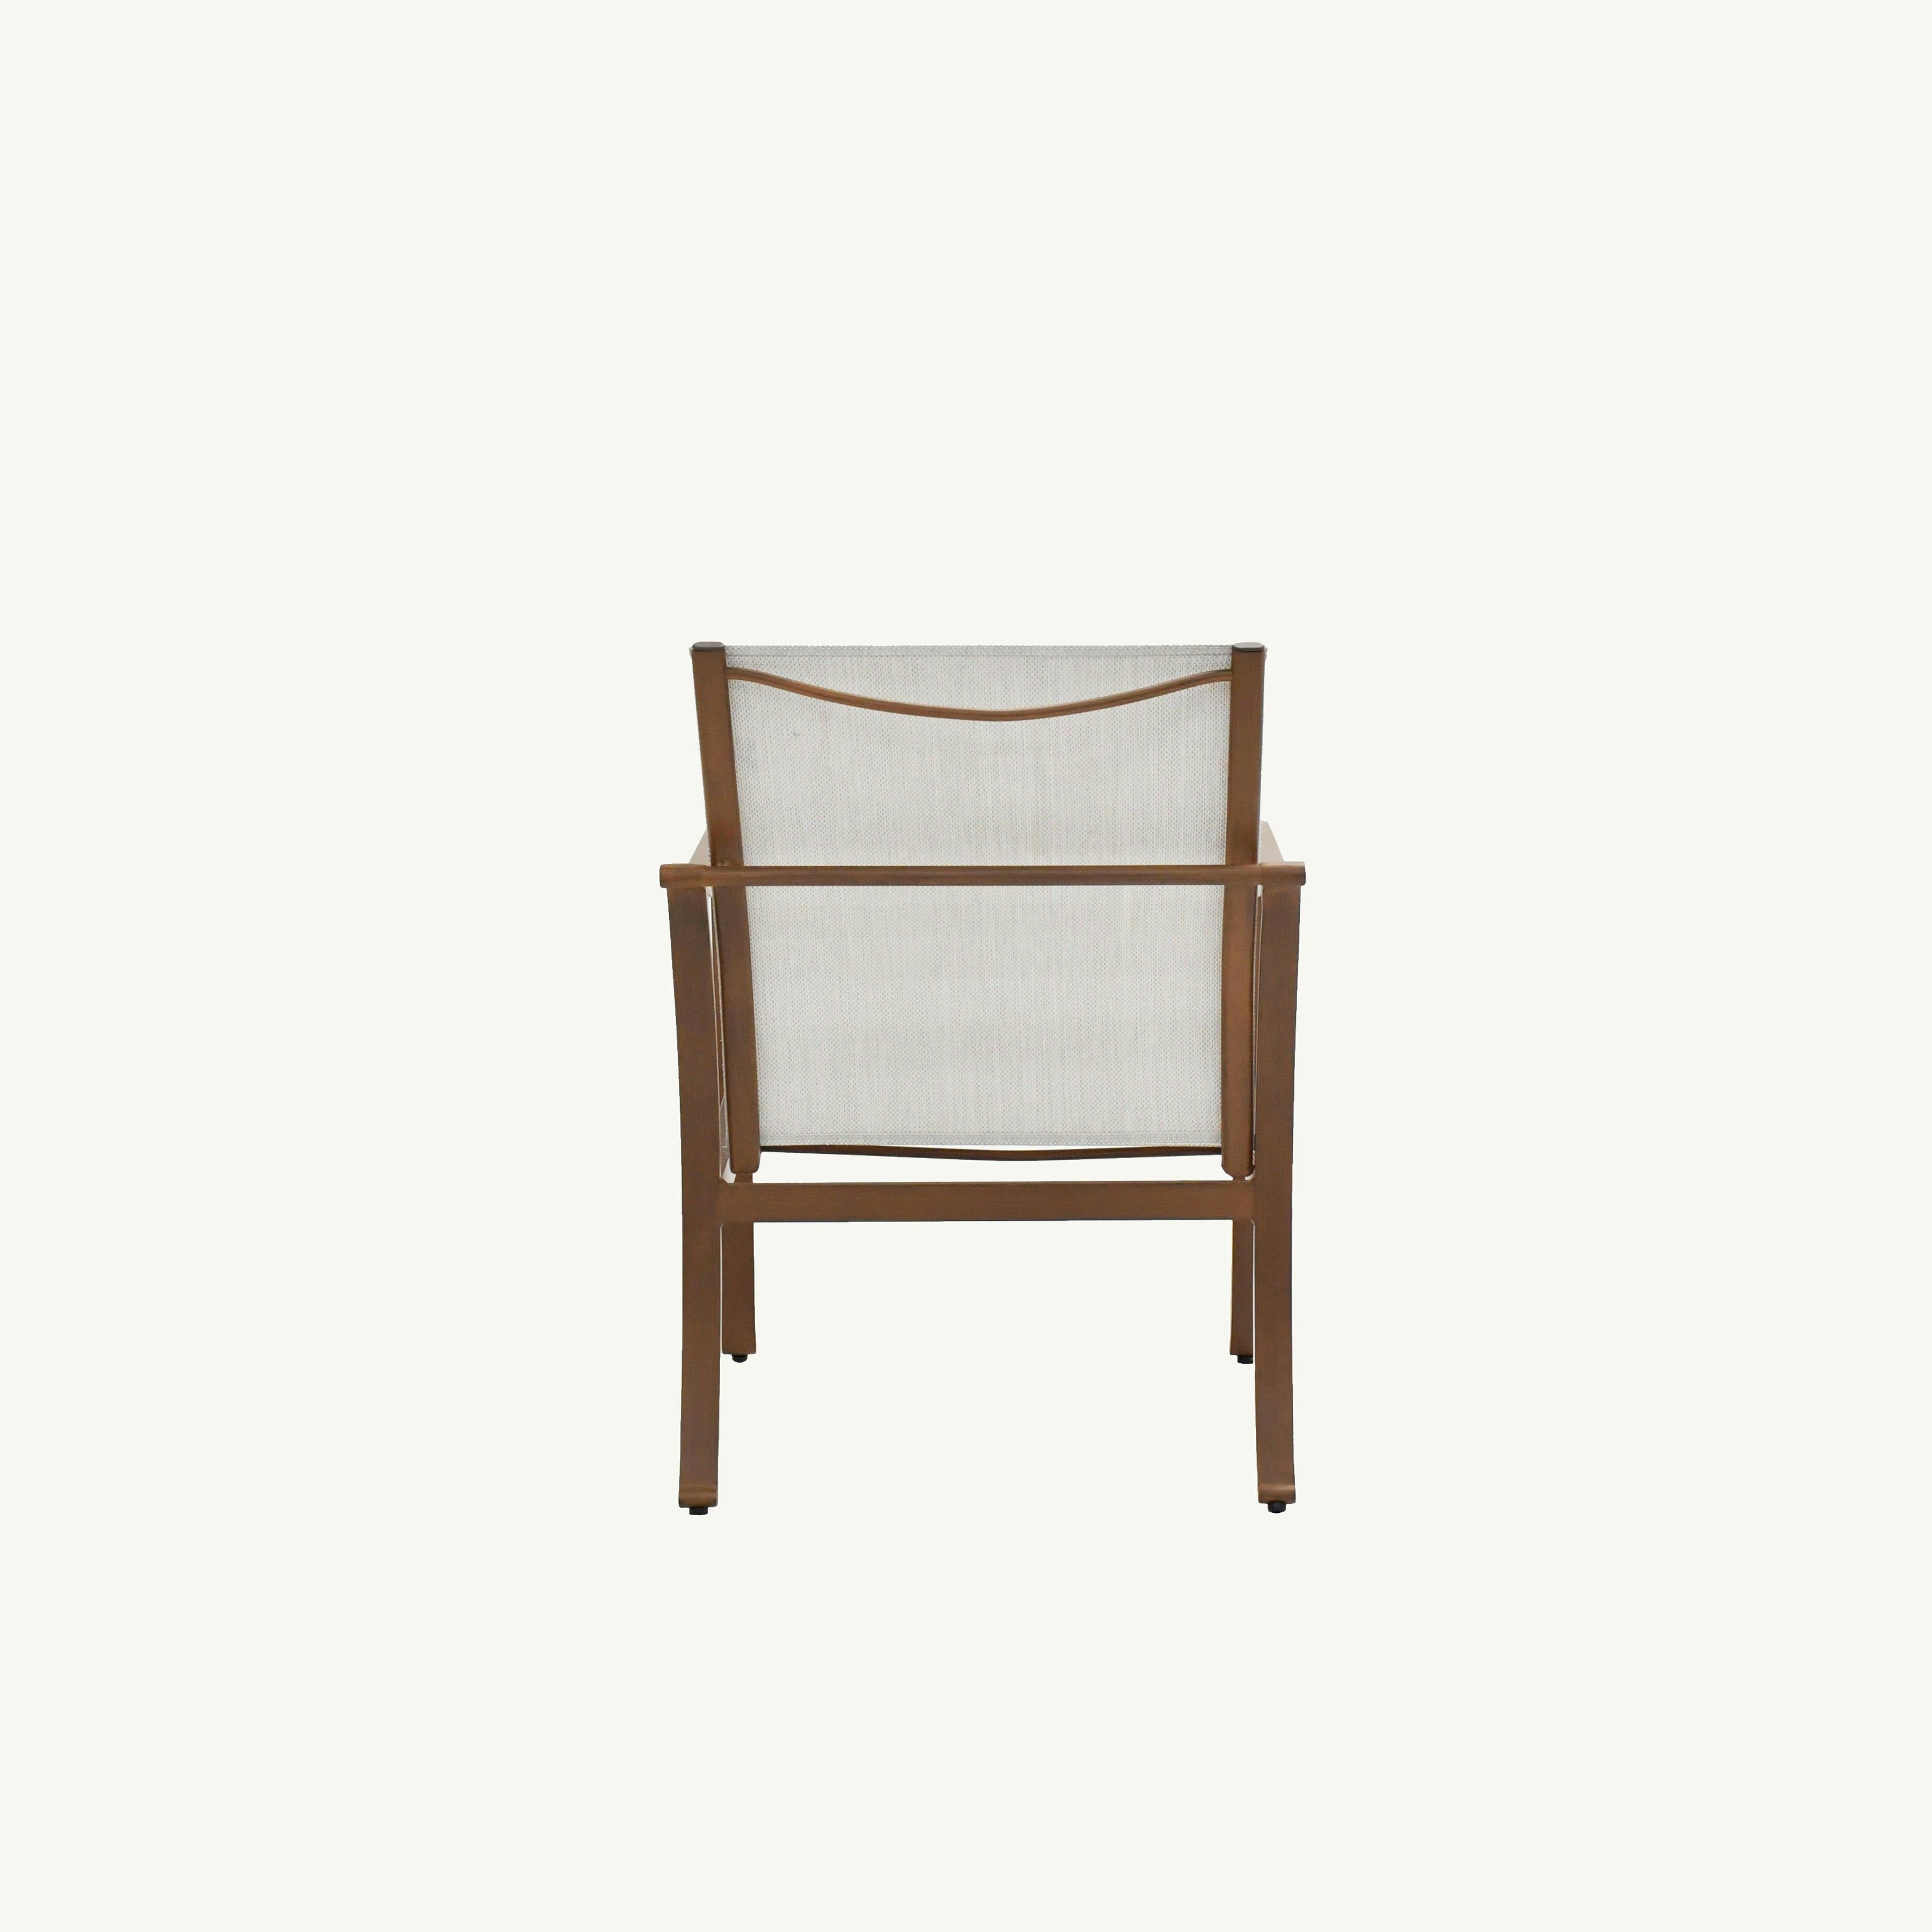 Korda Sling Dining Chair By Castelle